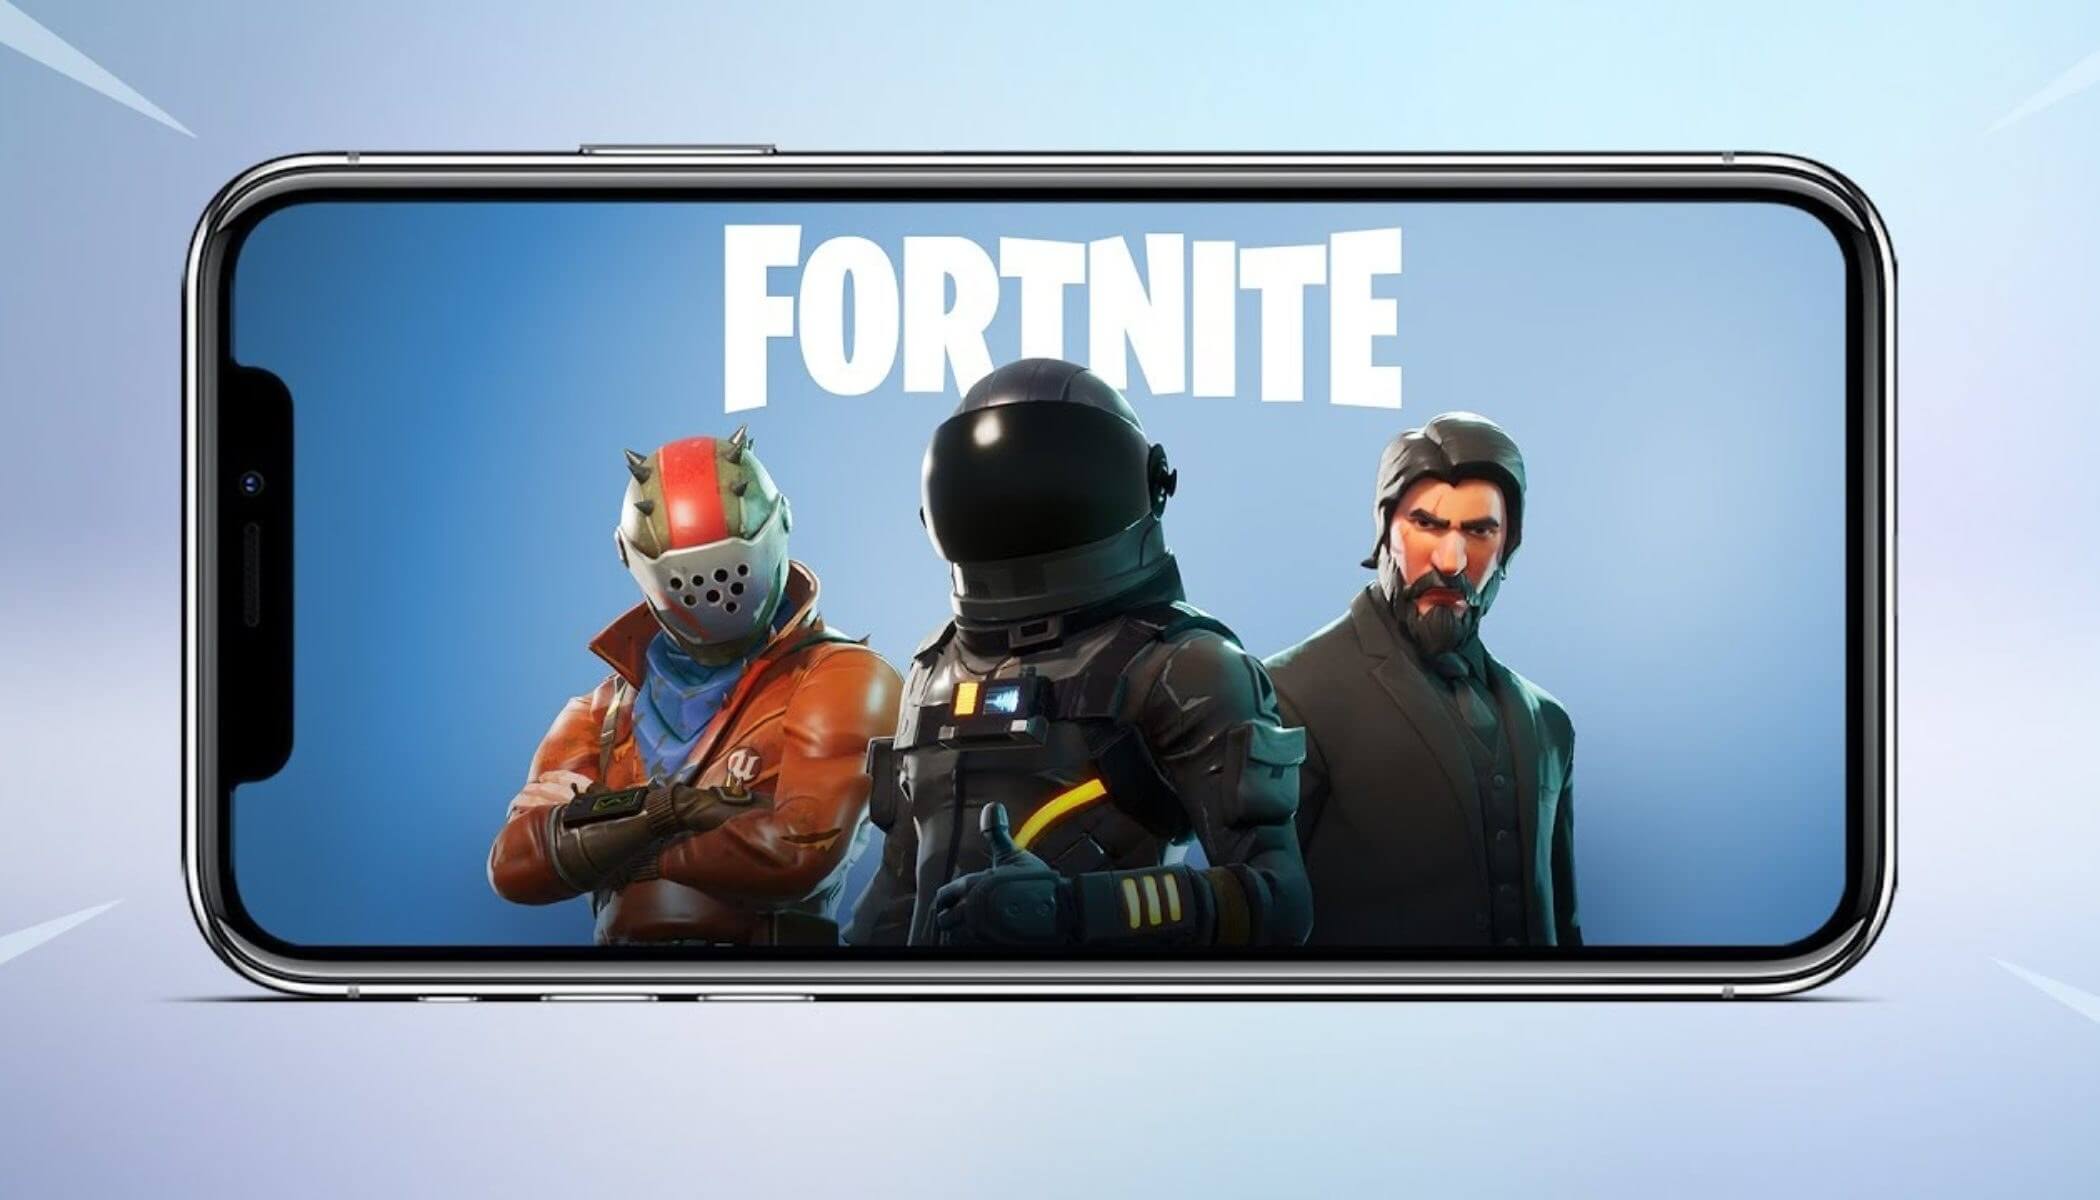 Sellers on eBay are trying to get thousands of dollars for used iPhones with Fortnite installed